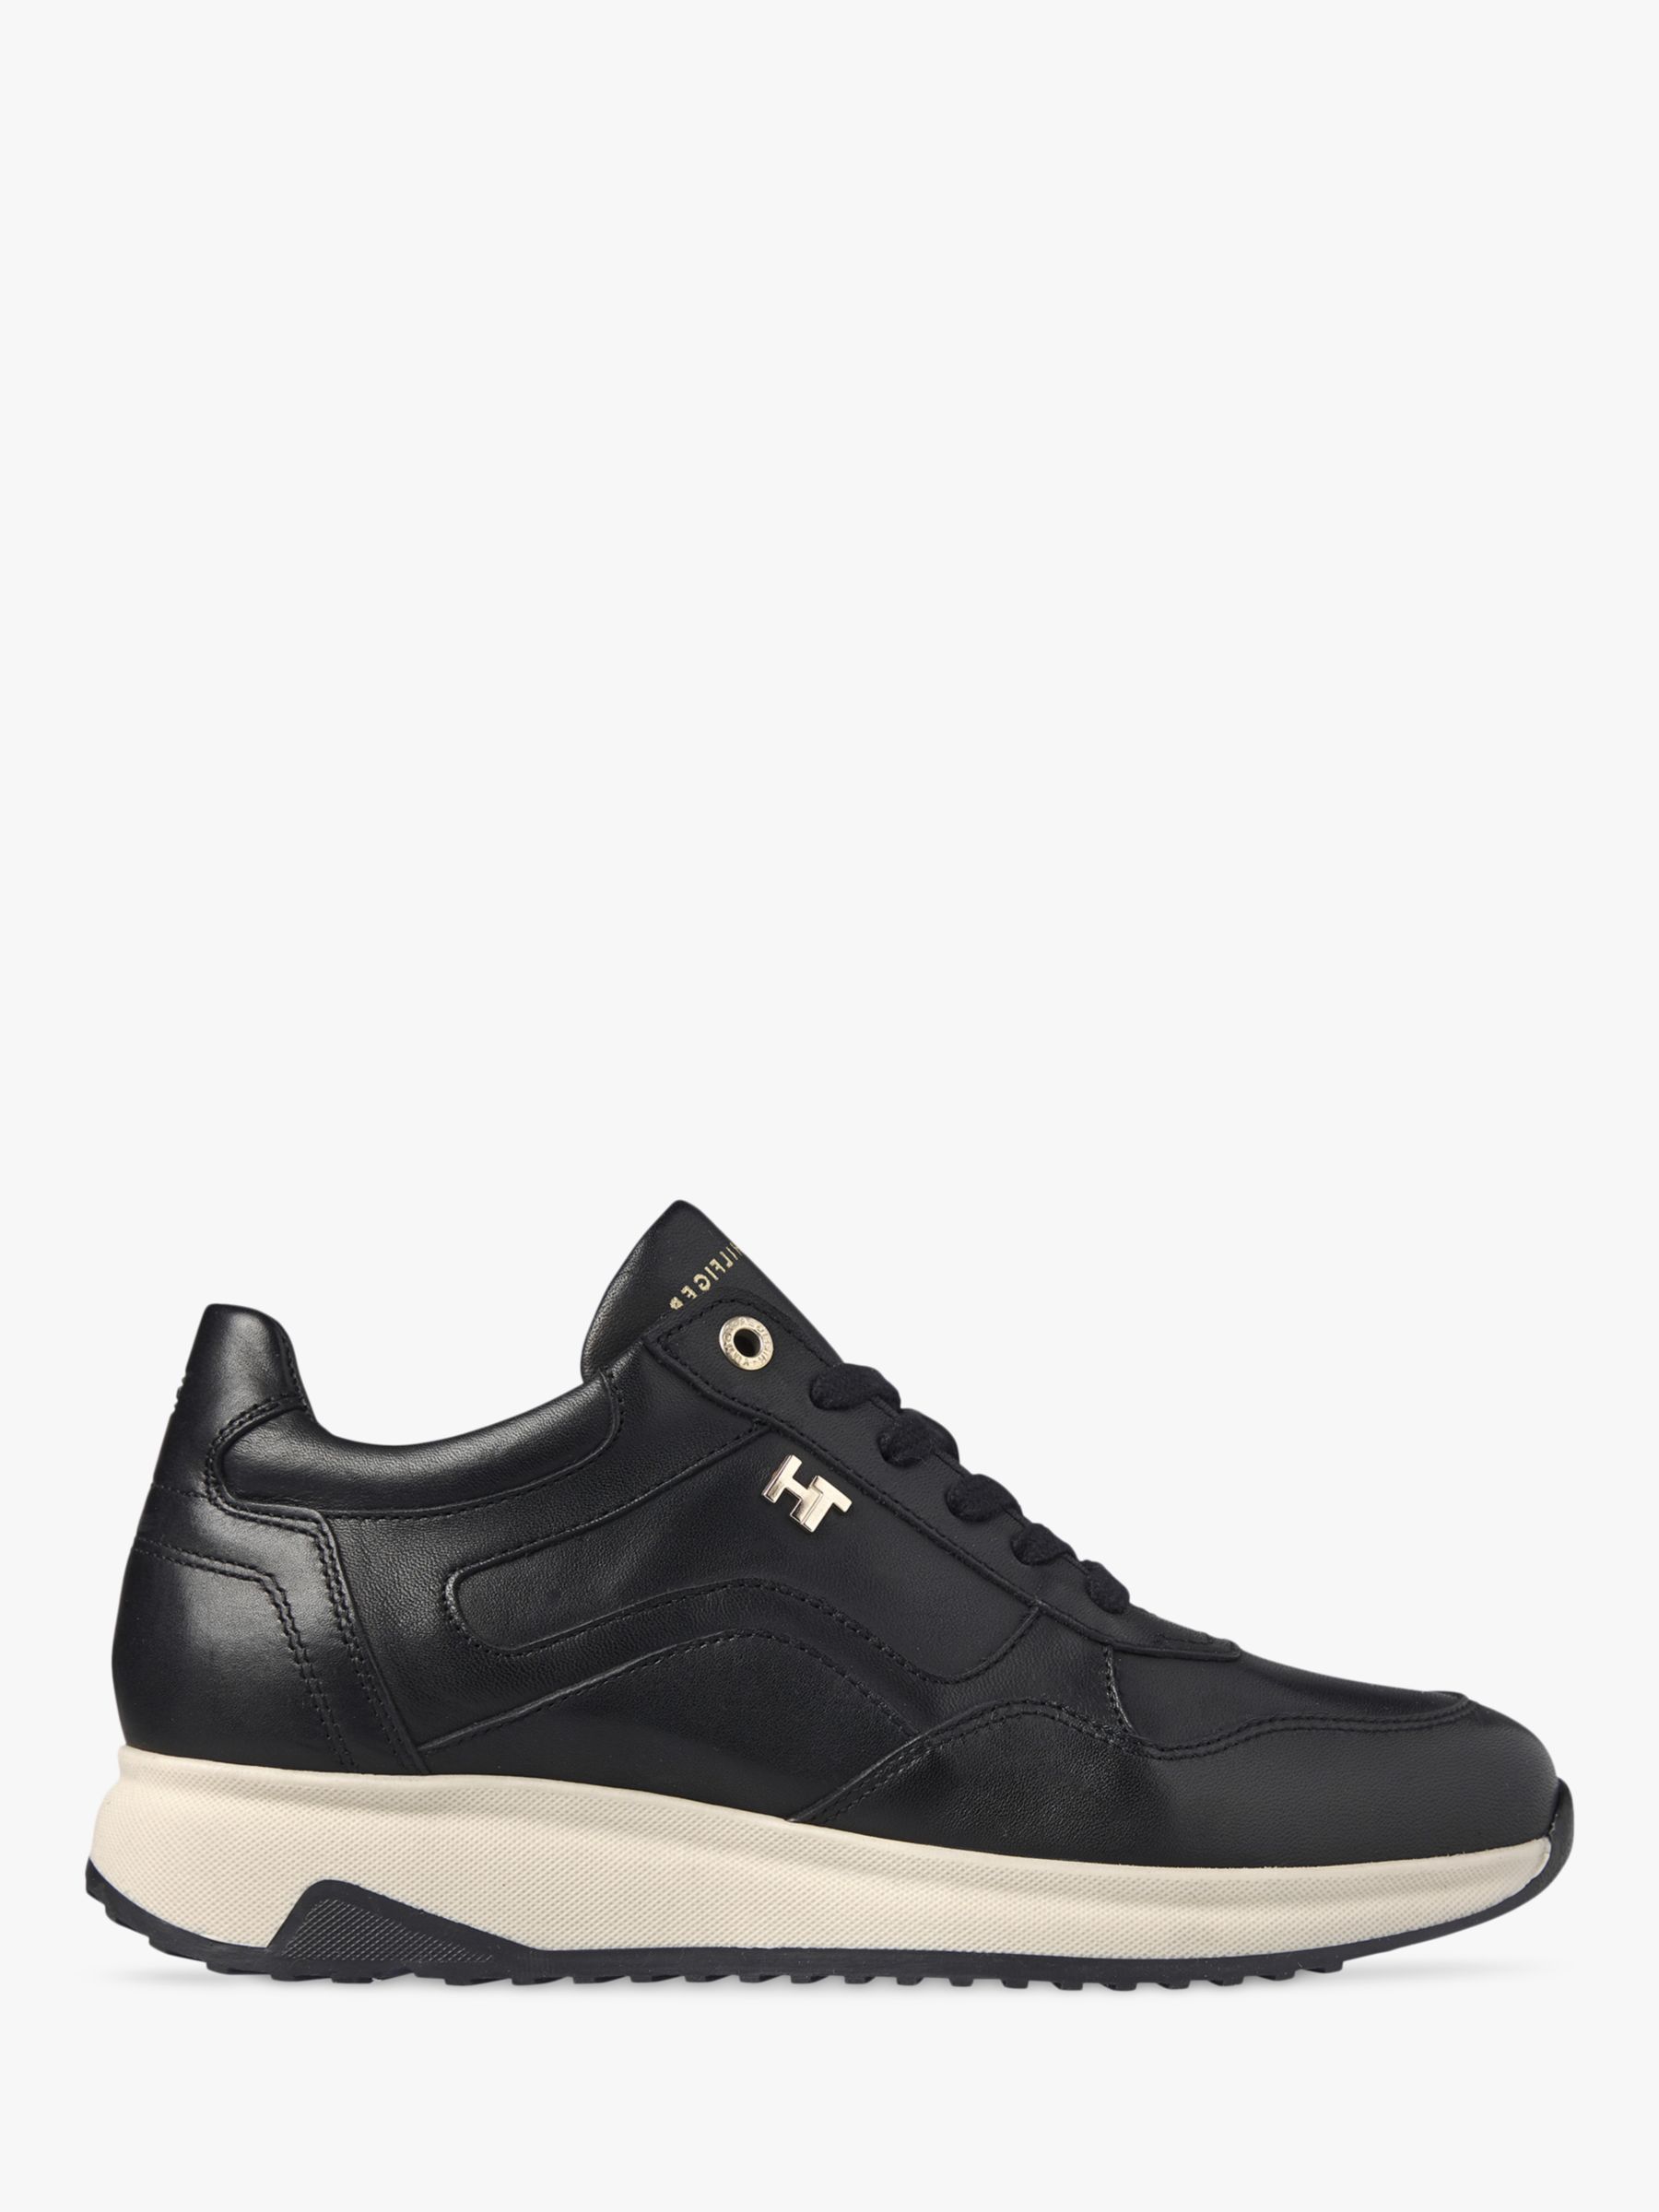 Tommy Hilfiger Elevated Branded Leather Trainers, Black at John Lewis ...